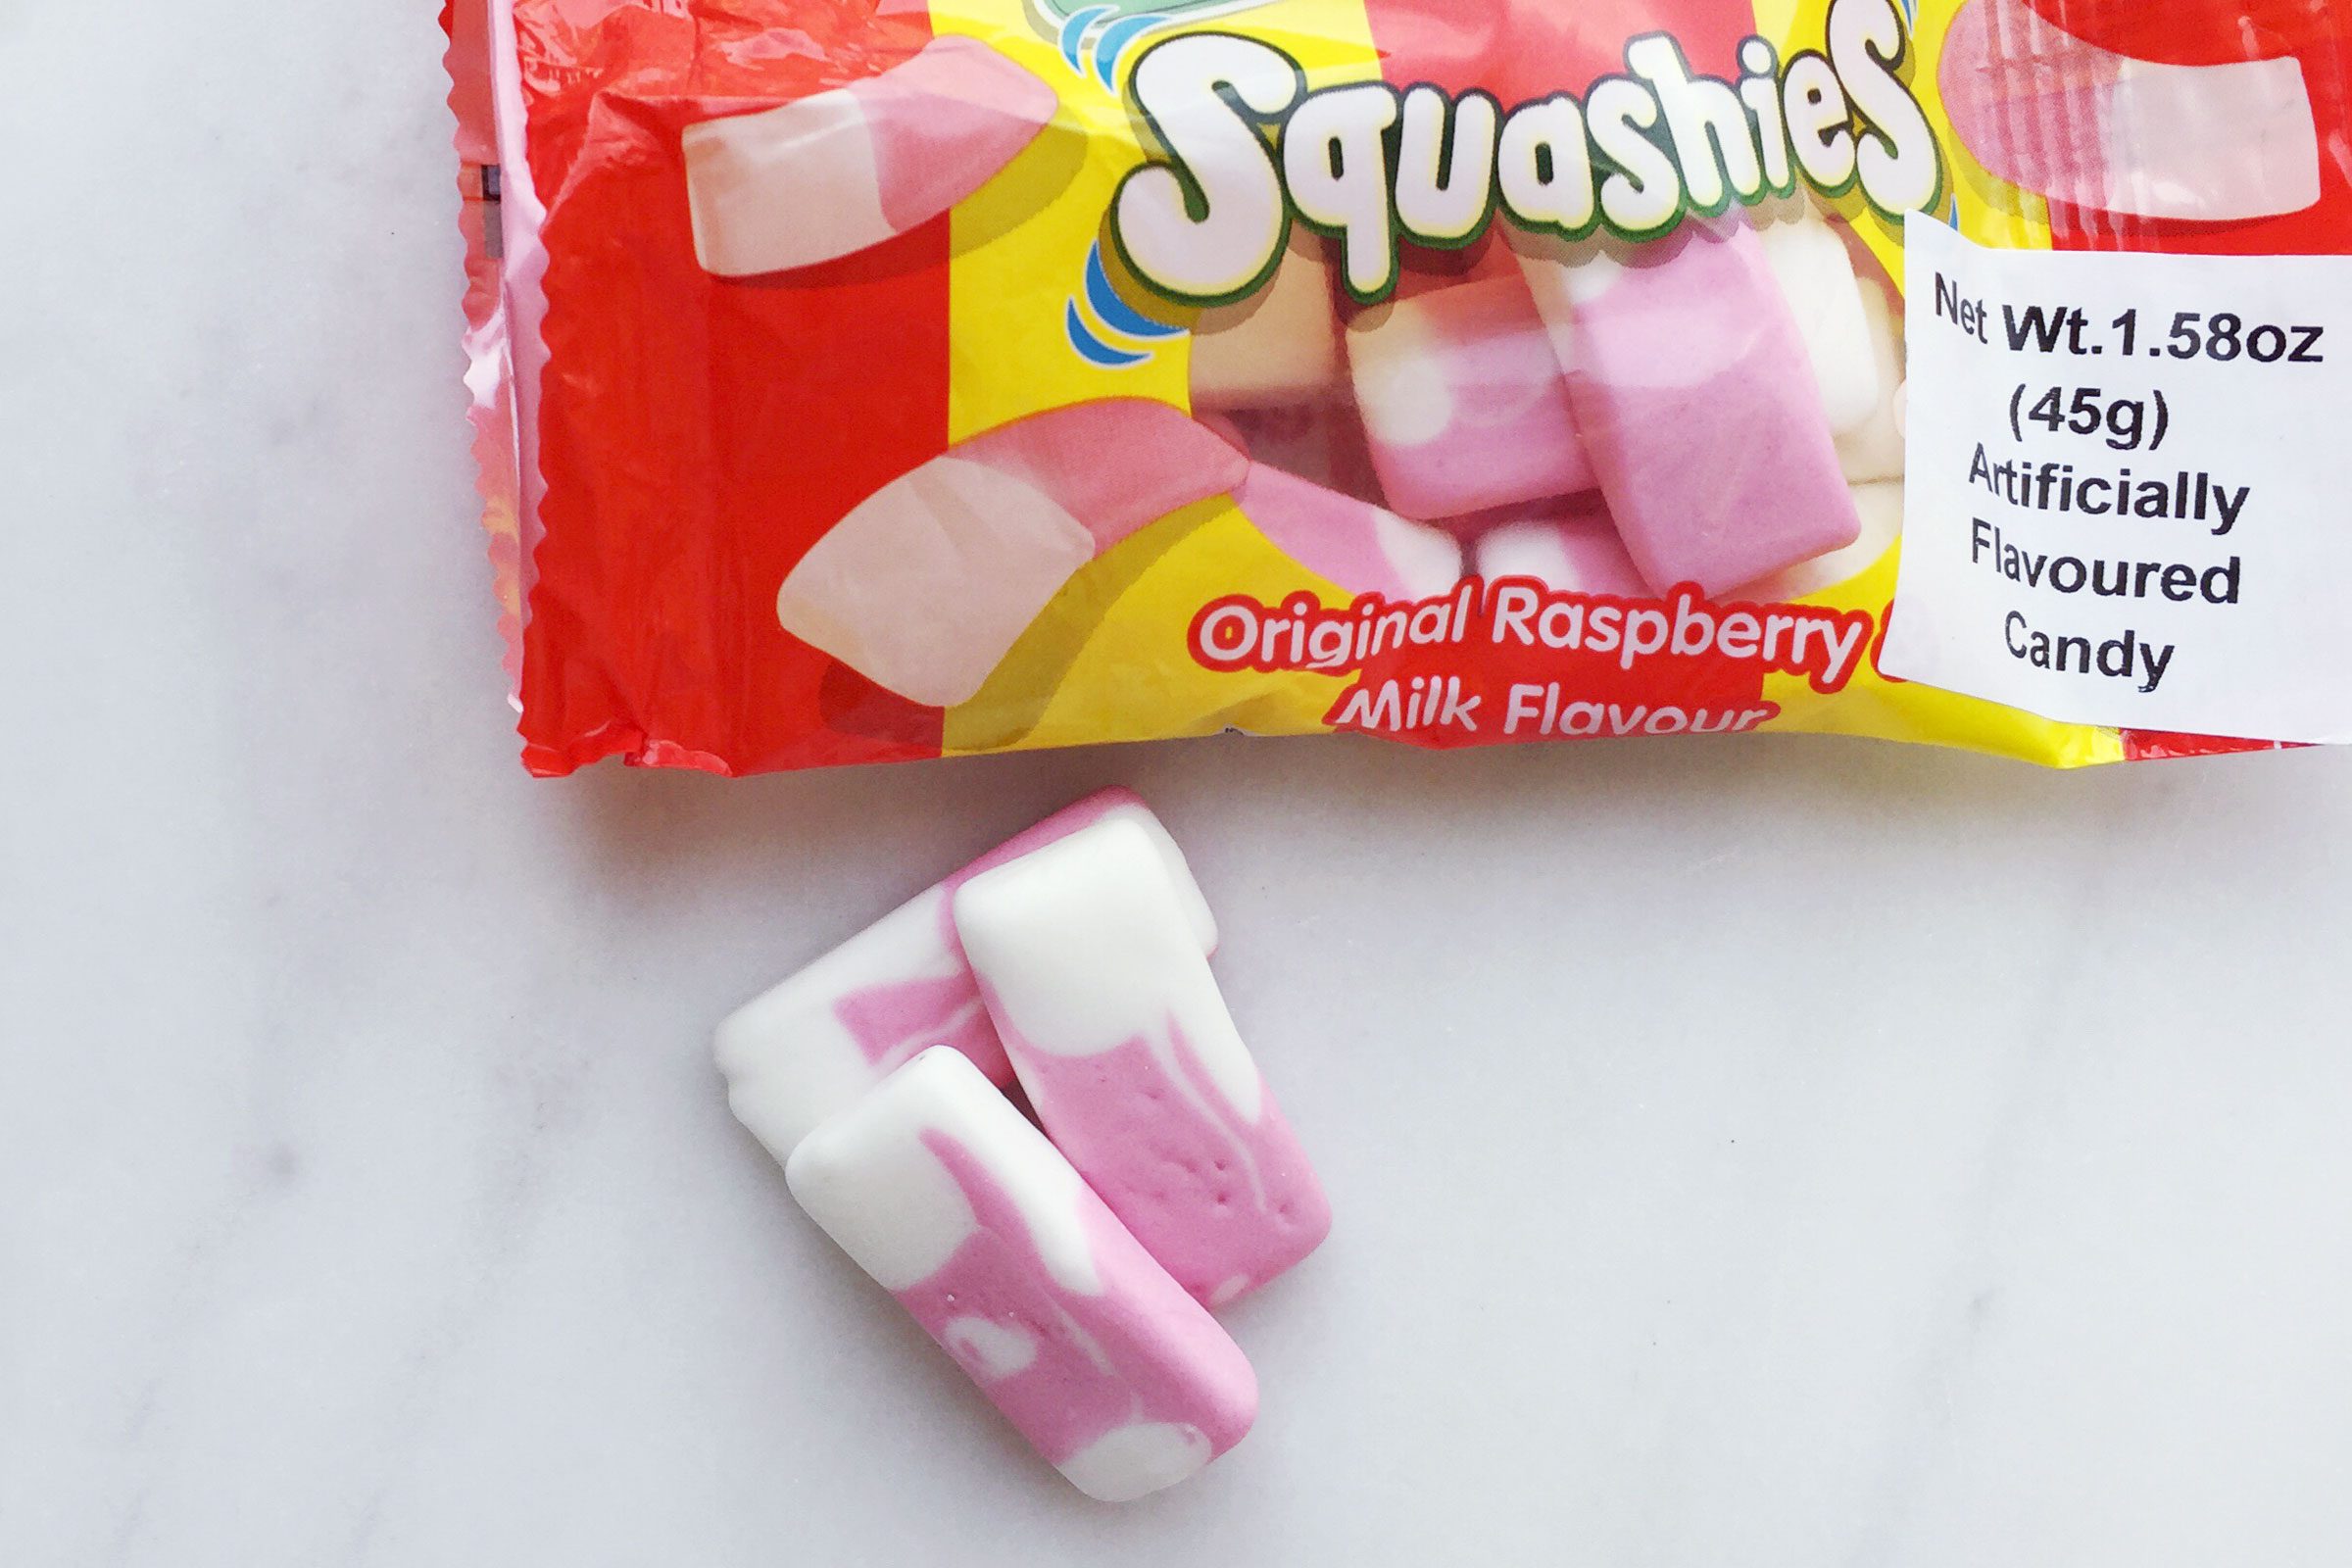 Drumstick Squashies British candy on a marble surface